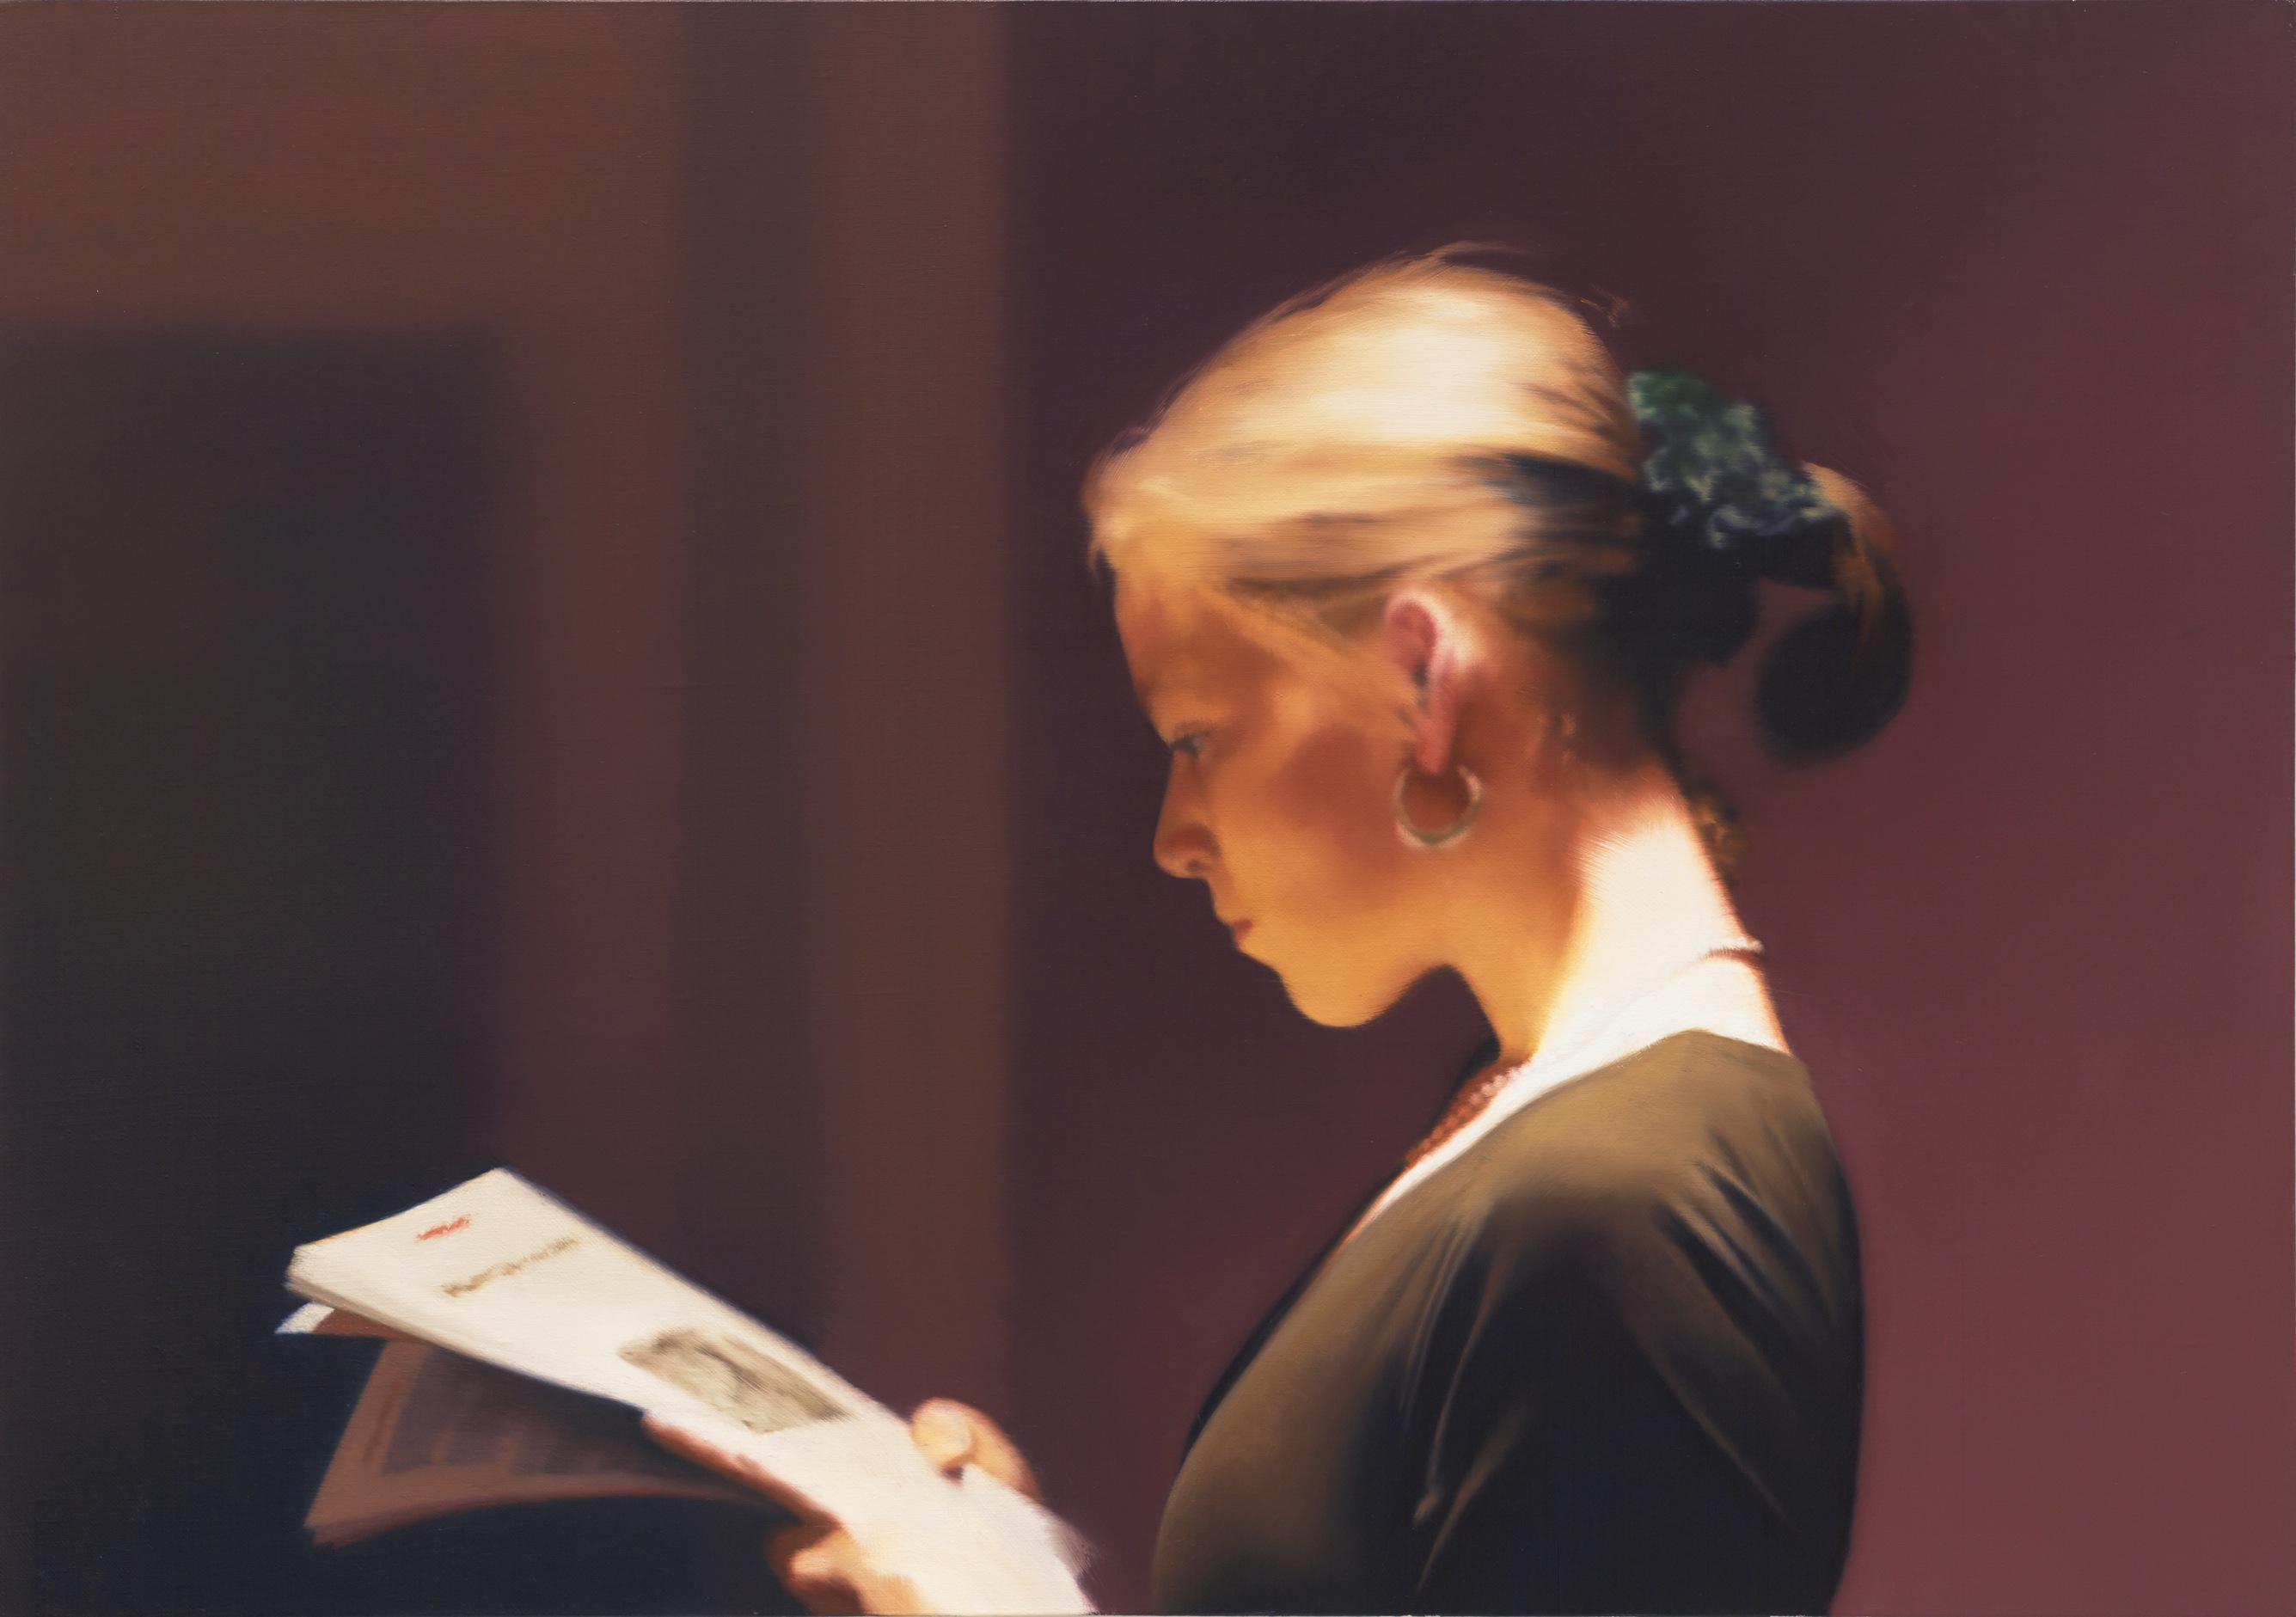 The Reader by Gerhard Richter - 1994 - 72 x 102 cm SFMOMA San Francisco Museum of Art